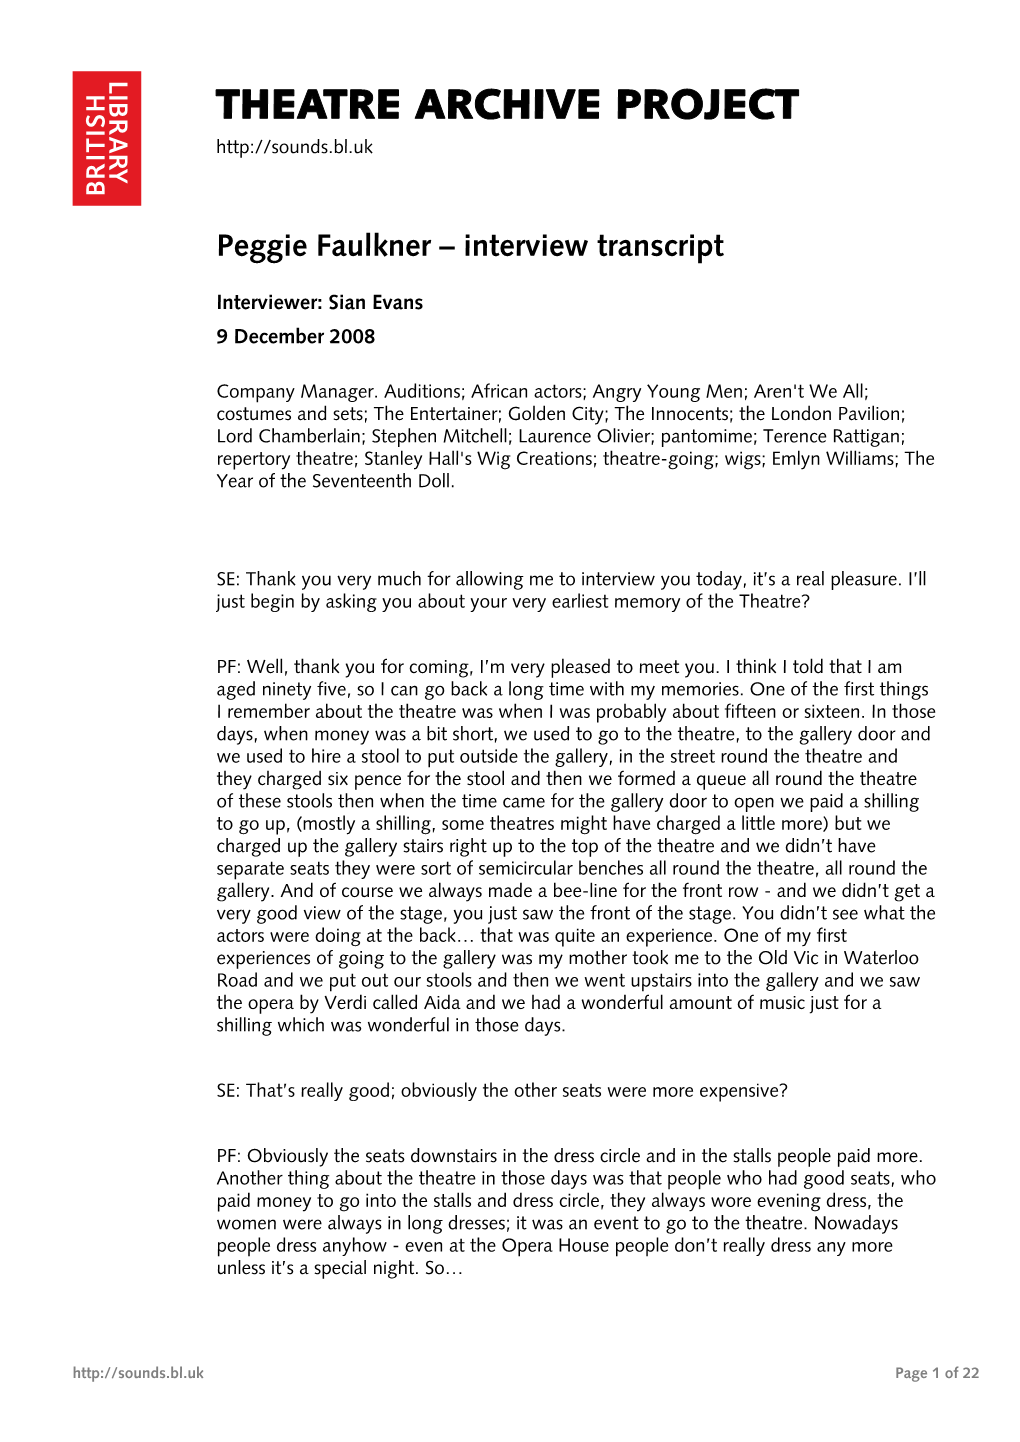 Theatre Archive Project: Interview with Peggie Faulkner